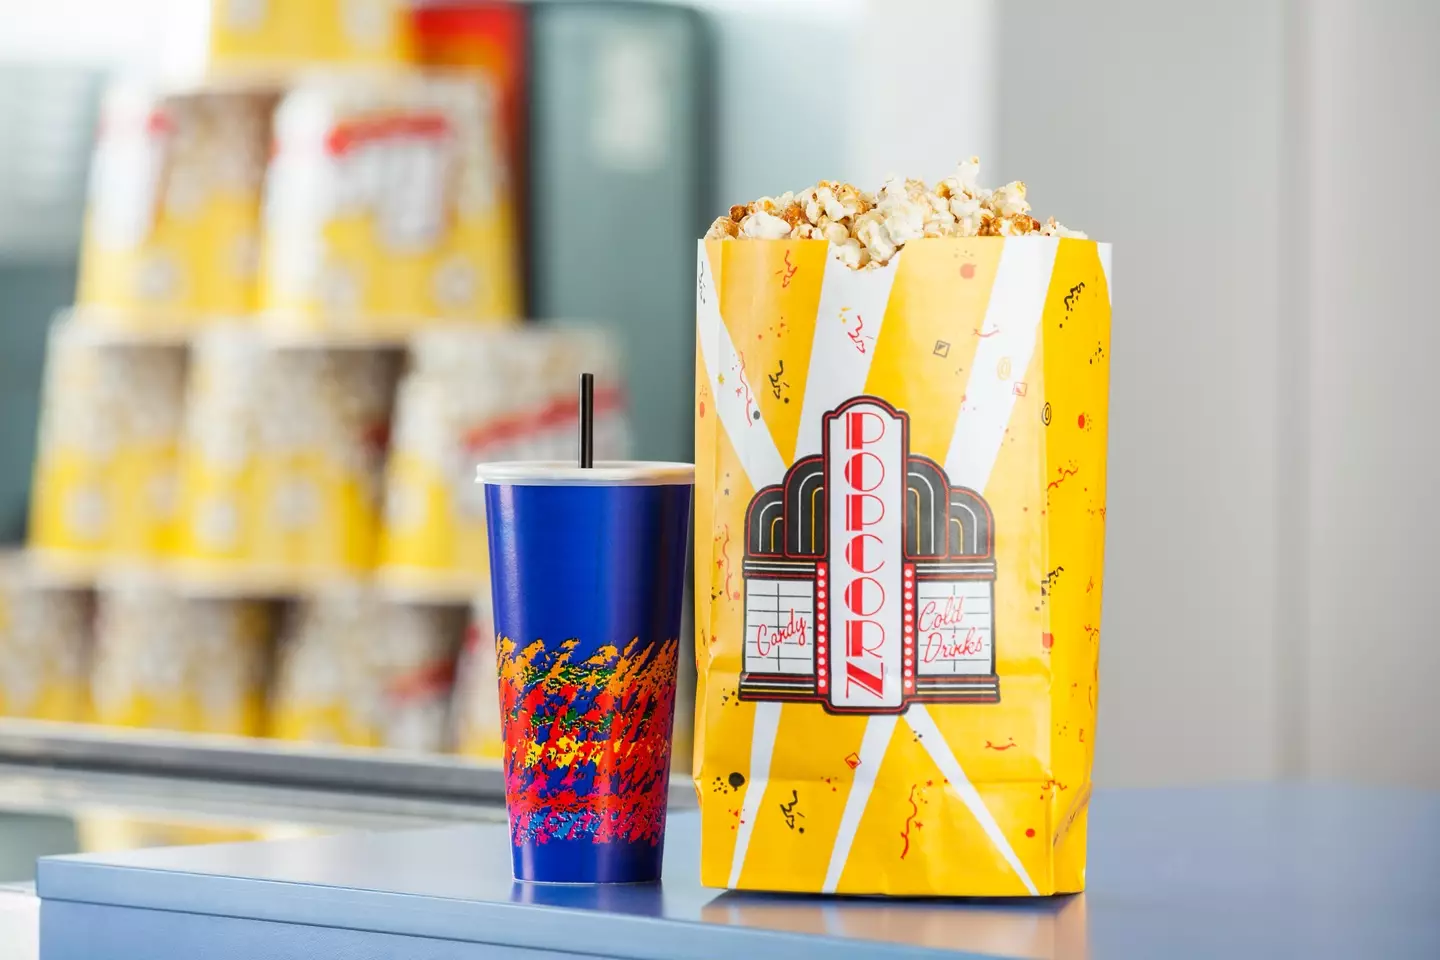 Cinema snacks can often be pricey.